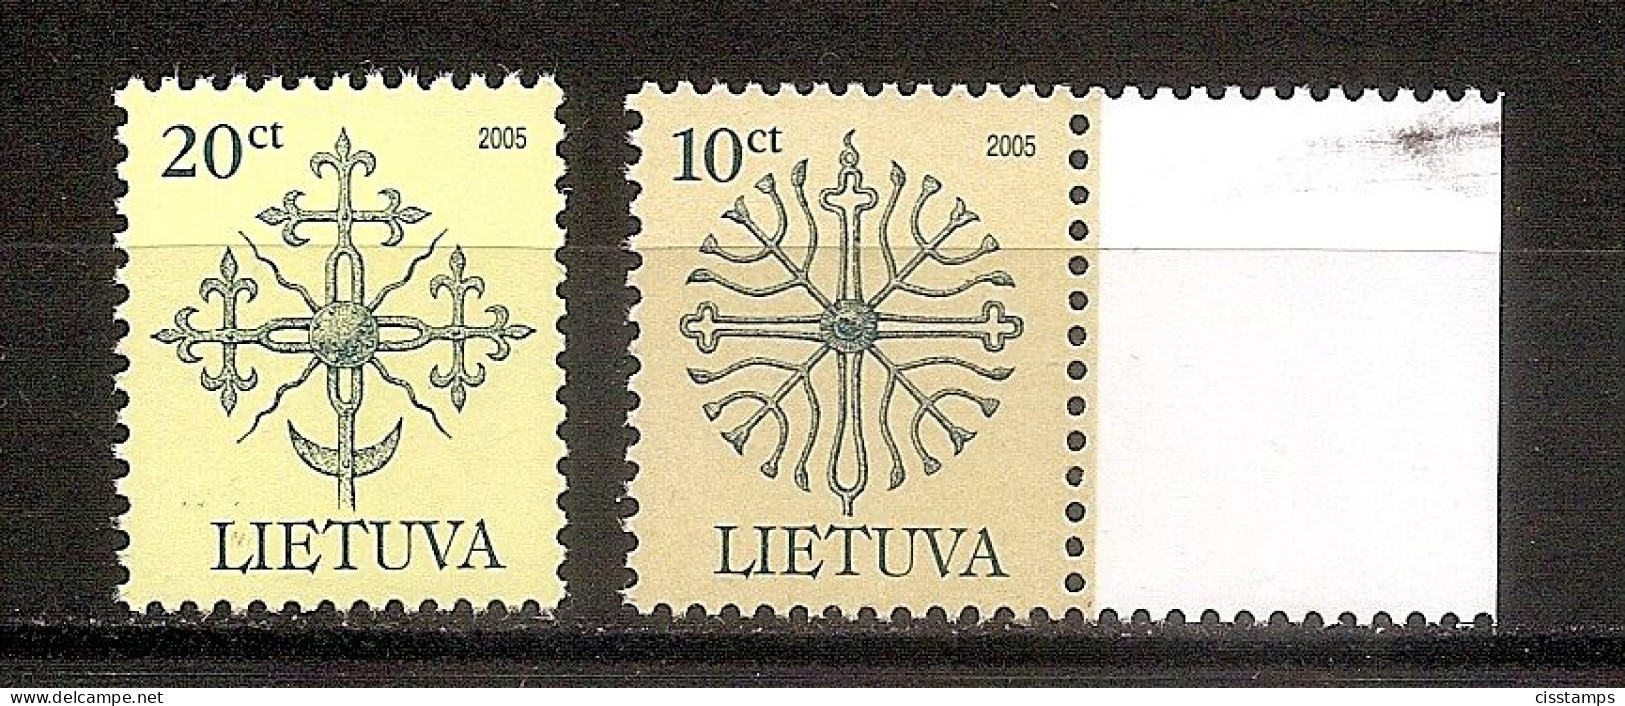 LITHUANIA 2005-10-08●Definitive●Forged Tops Of Monuments●Perf.13x121/2●Size 20x24●Mi 889I-90I●MNH - Lithuania